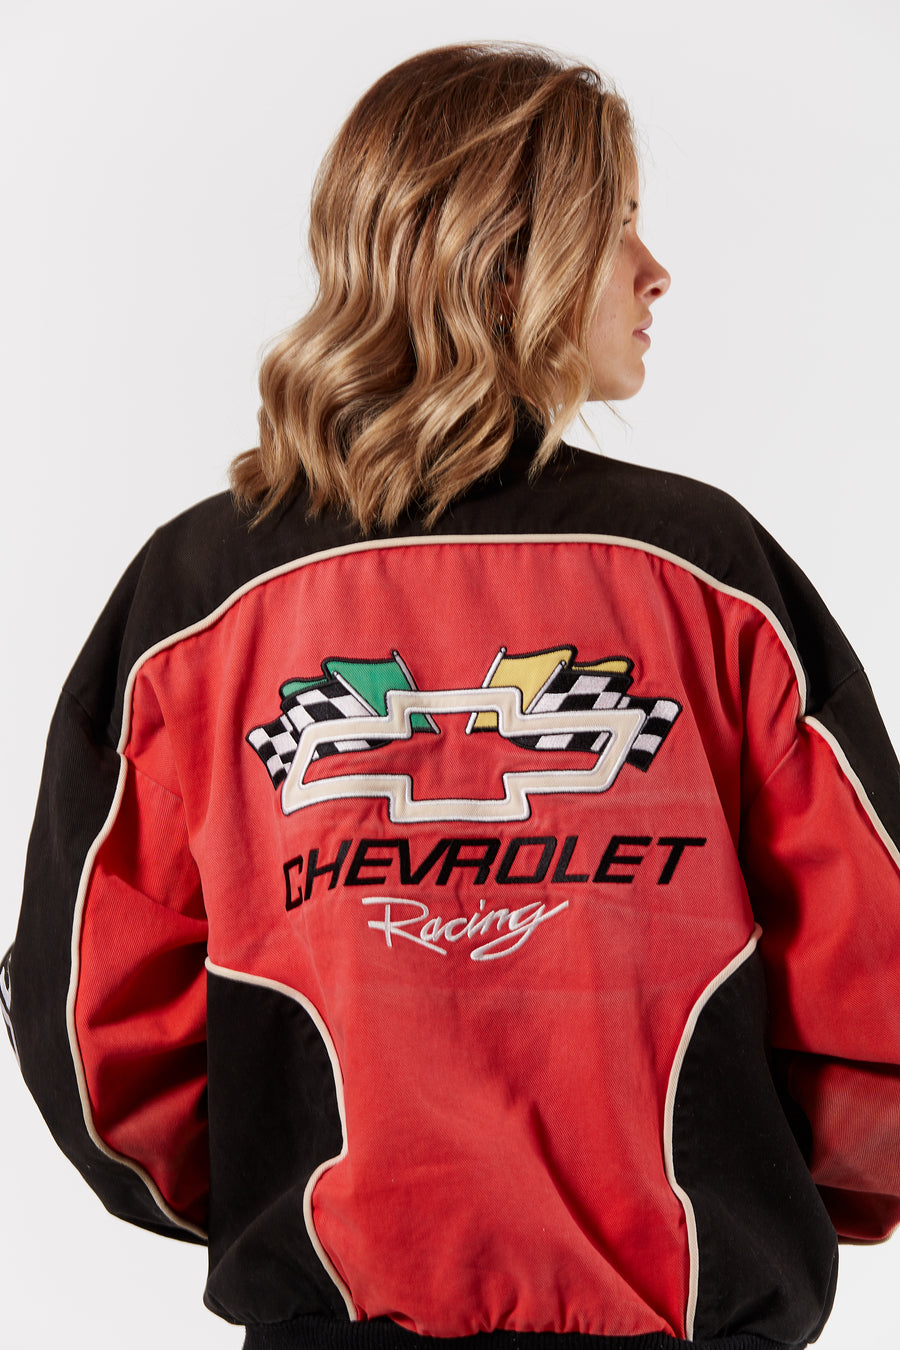 Nascar Chevrolet Racing Jacket in a vintage style from thrift store Twise Studio